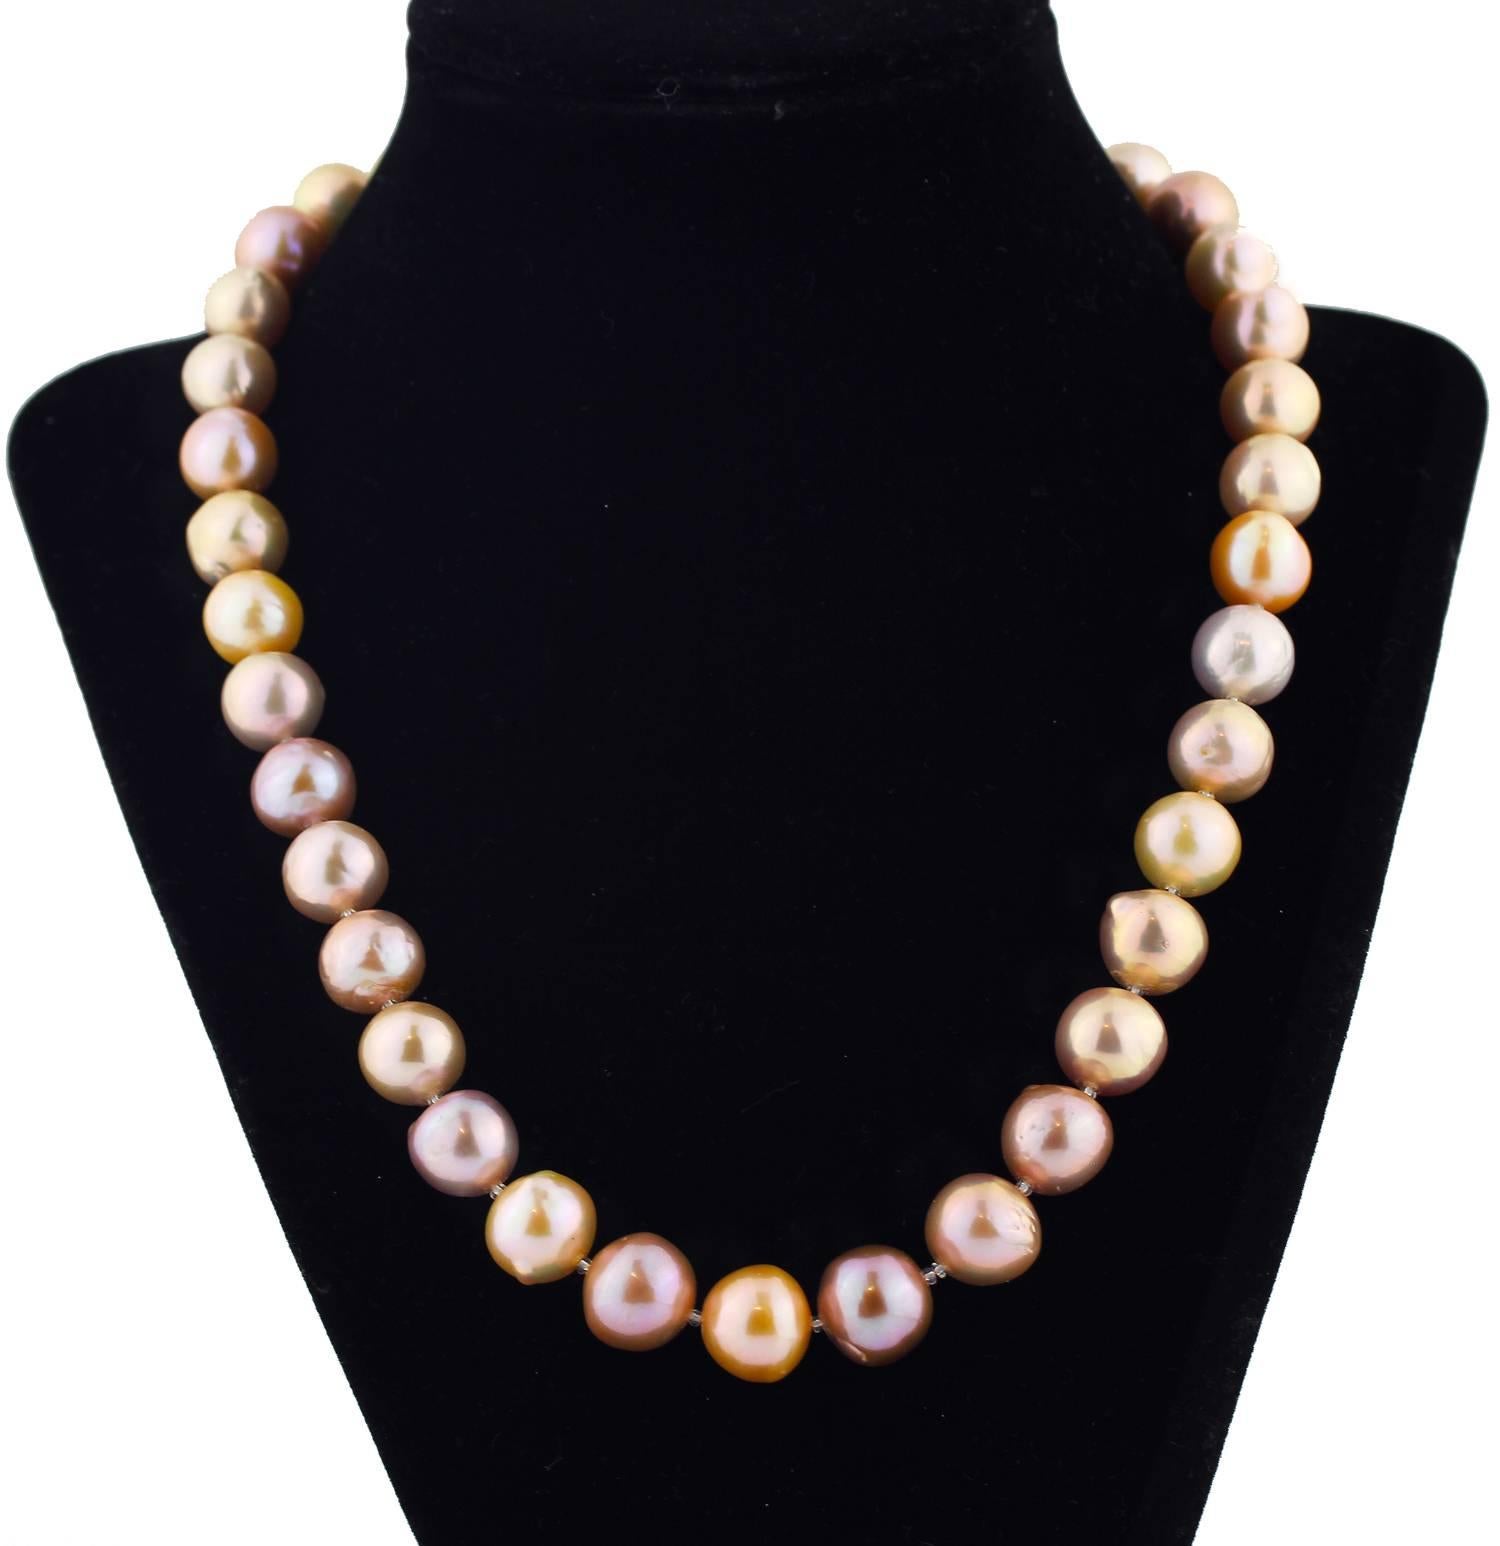 Gemjunky Unique Beautiful soft tones of iridescent pearlescent goldy cream and mauve tones of these glowing natural cultured Pearls on this handmade necklace.  Size:  slightly graduated up to approximately 13 mm;  Length:  19 inches;  Clasp:  silver